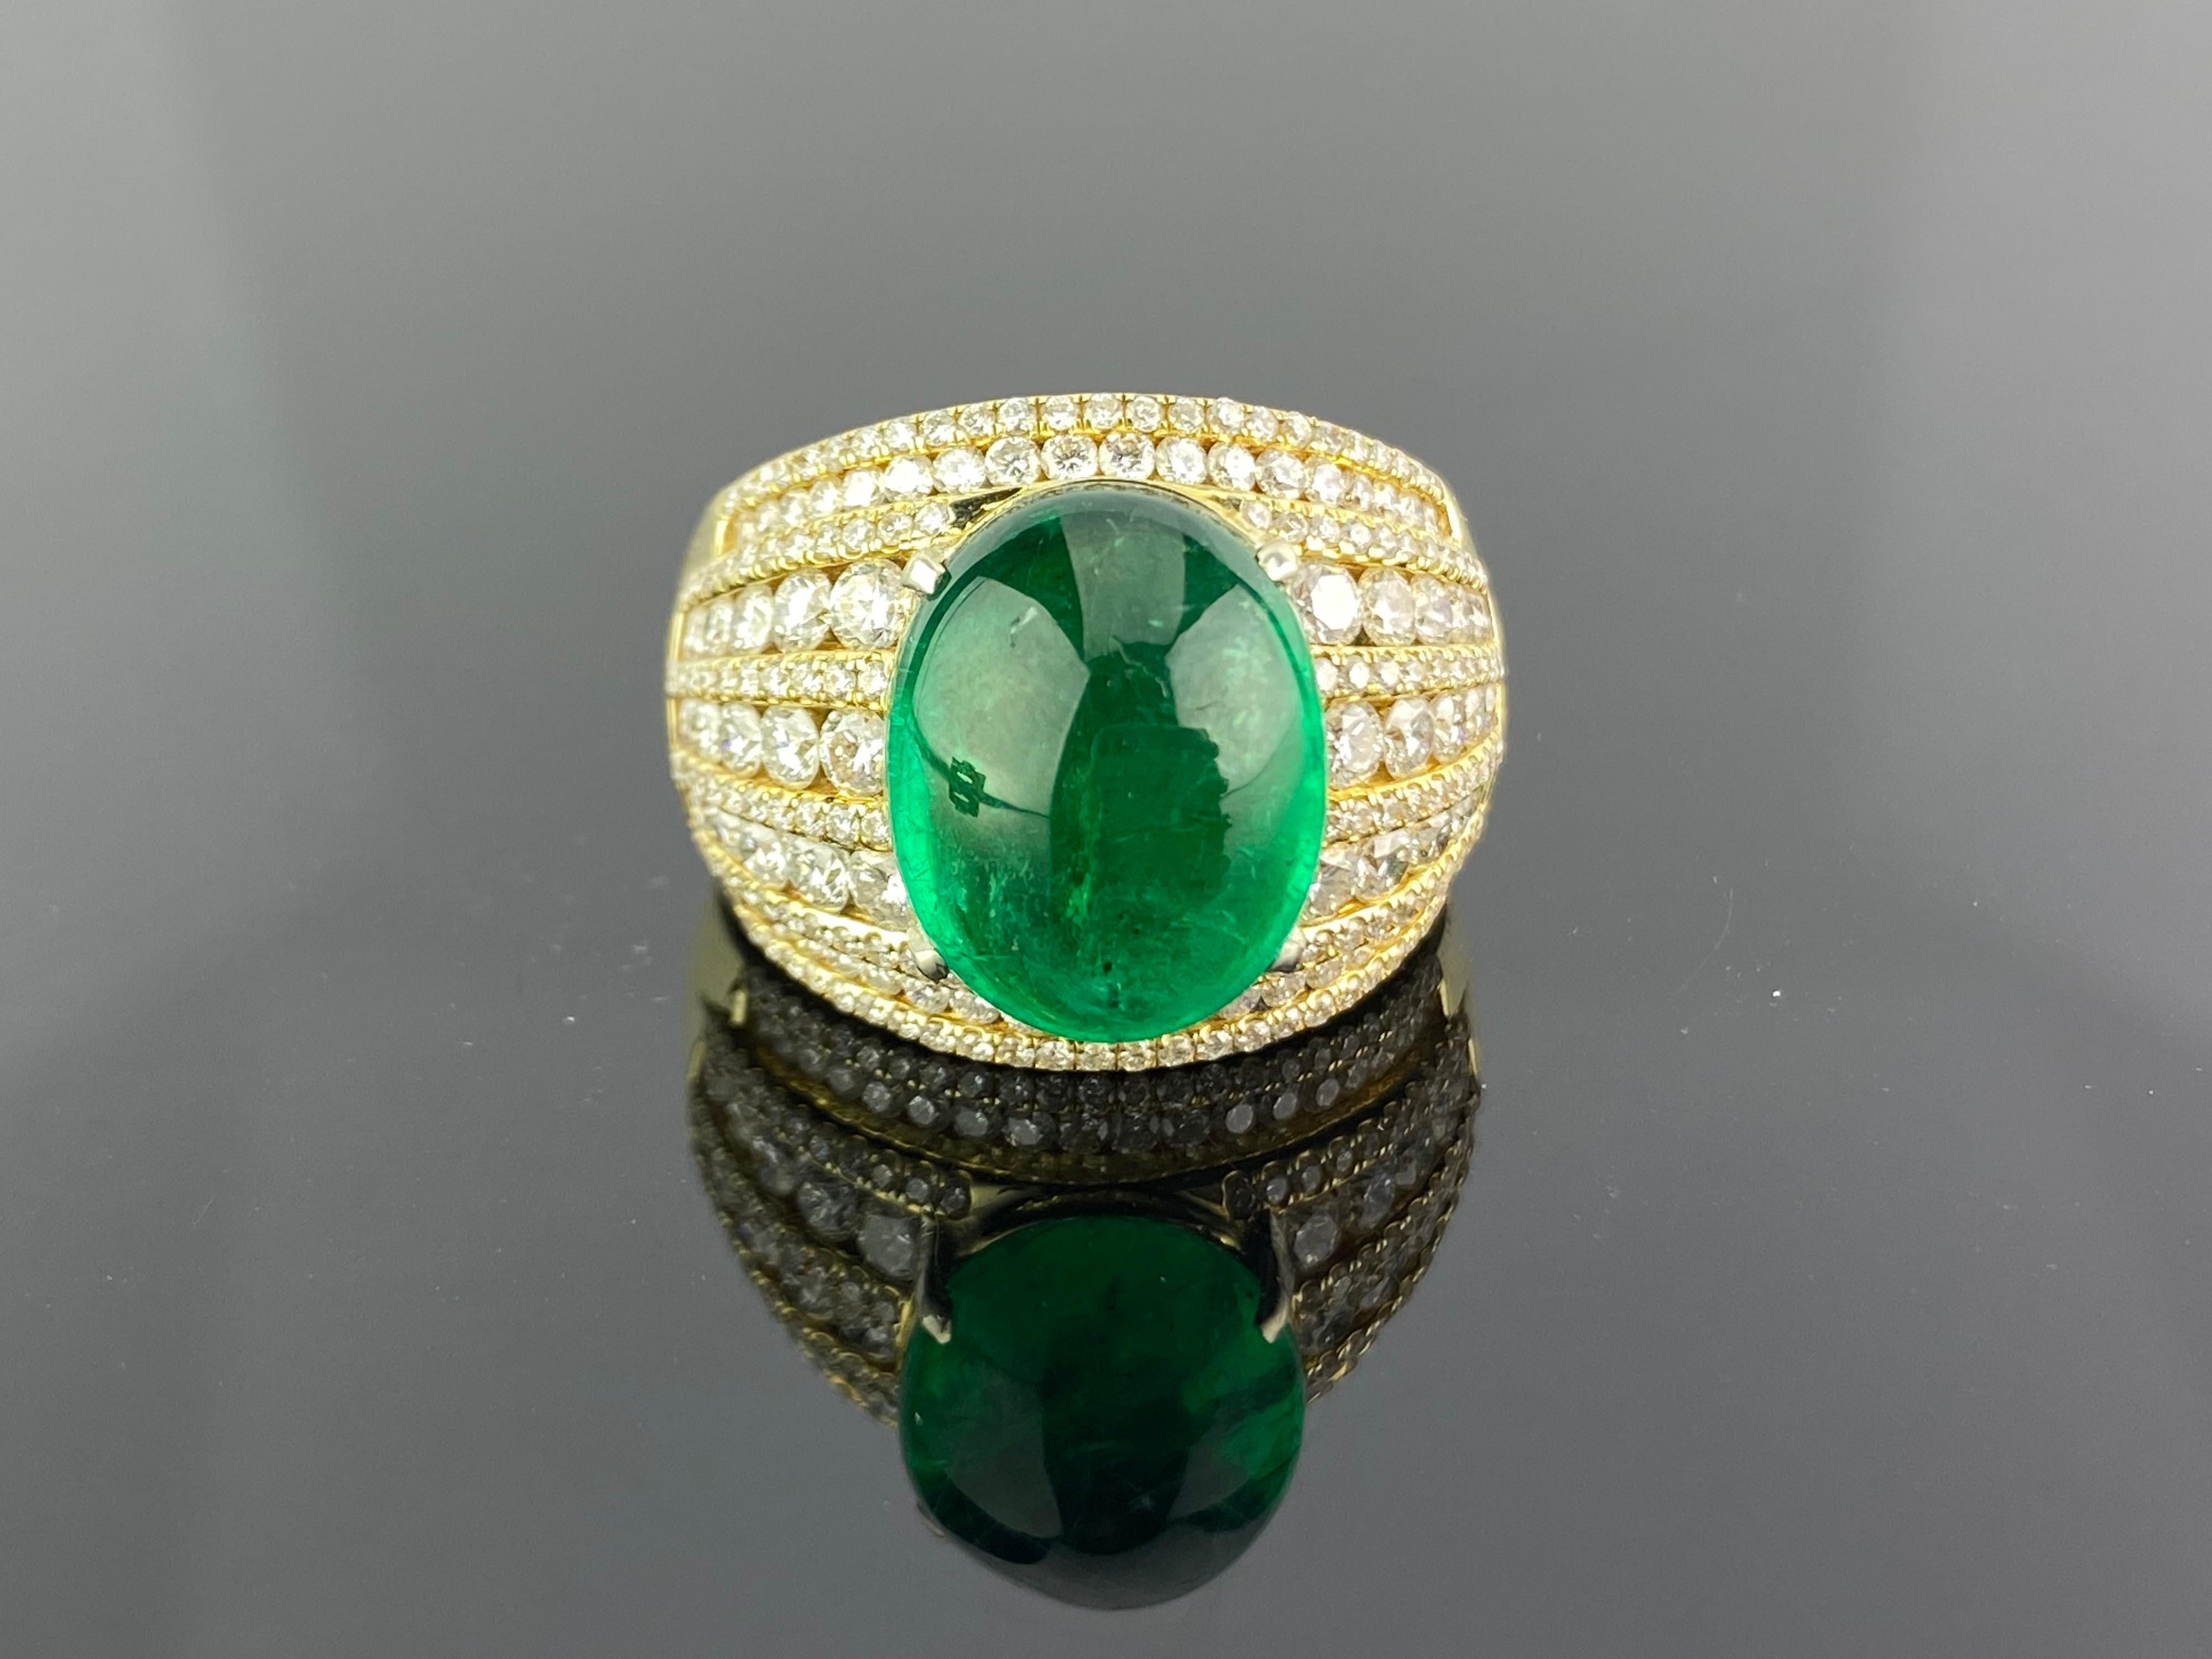 A 10.66 carat Zambian Emerald Cabochon ring with Diamonds all set in 18K yellow gold. The centre stone is completely transparent, with great lustre and colour Currently a ring size US 8.5, but we can resize the ring without additional cost.